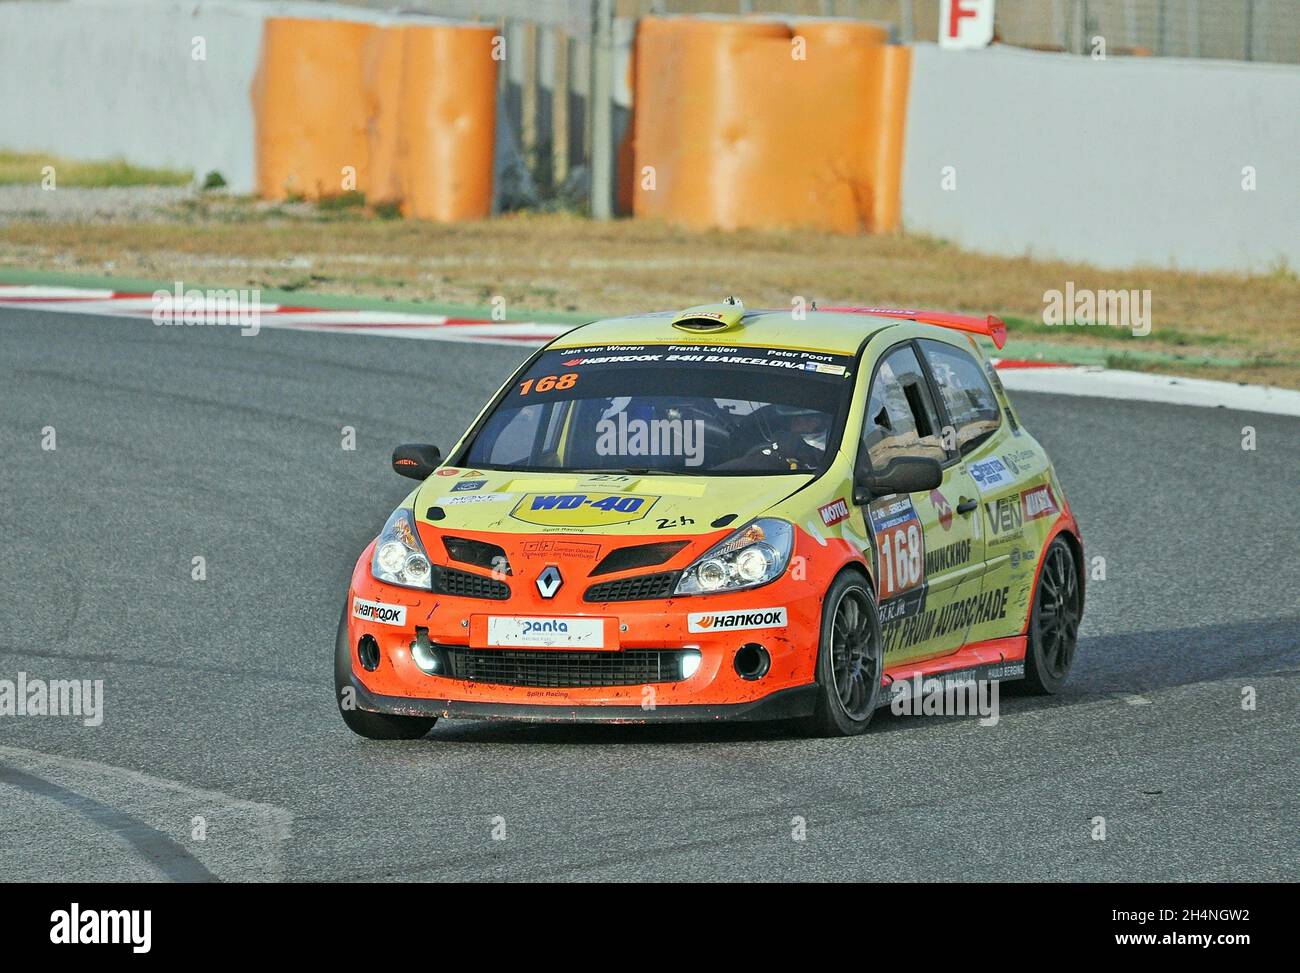 Renault Clio High Resolution Stock Photography and Images - Alamy